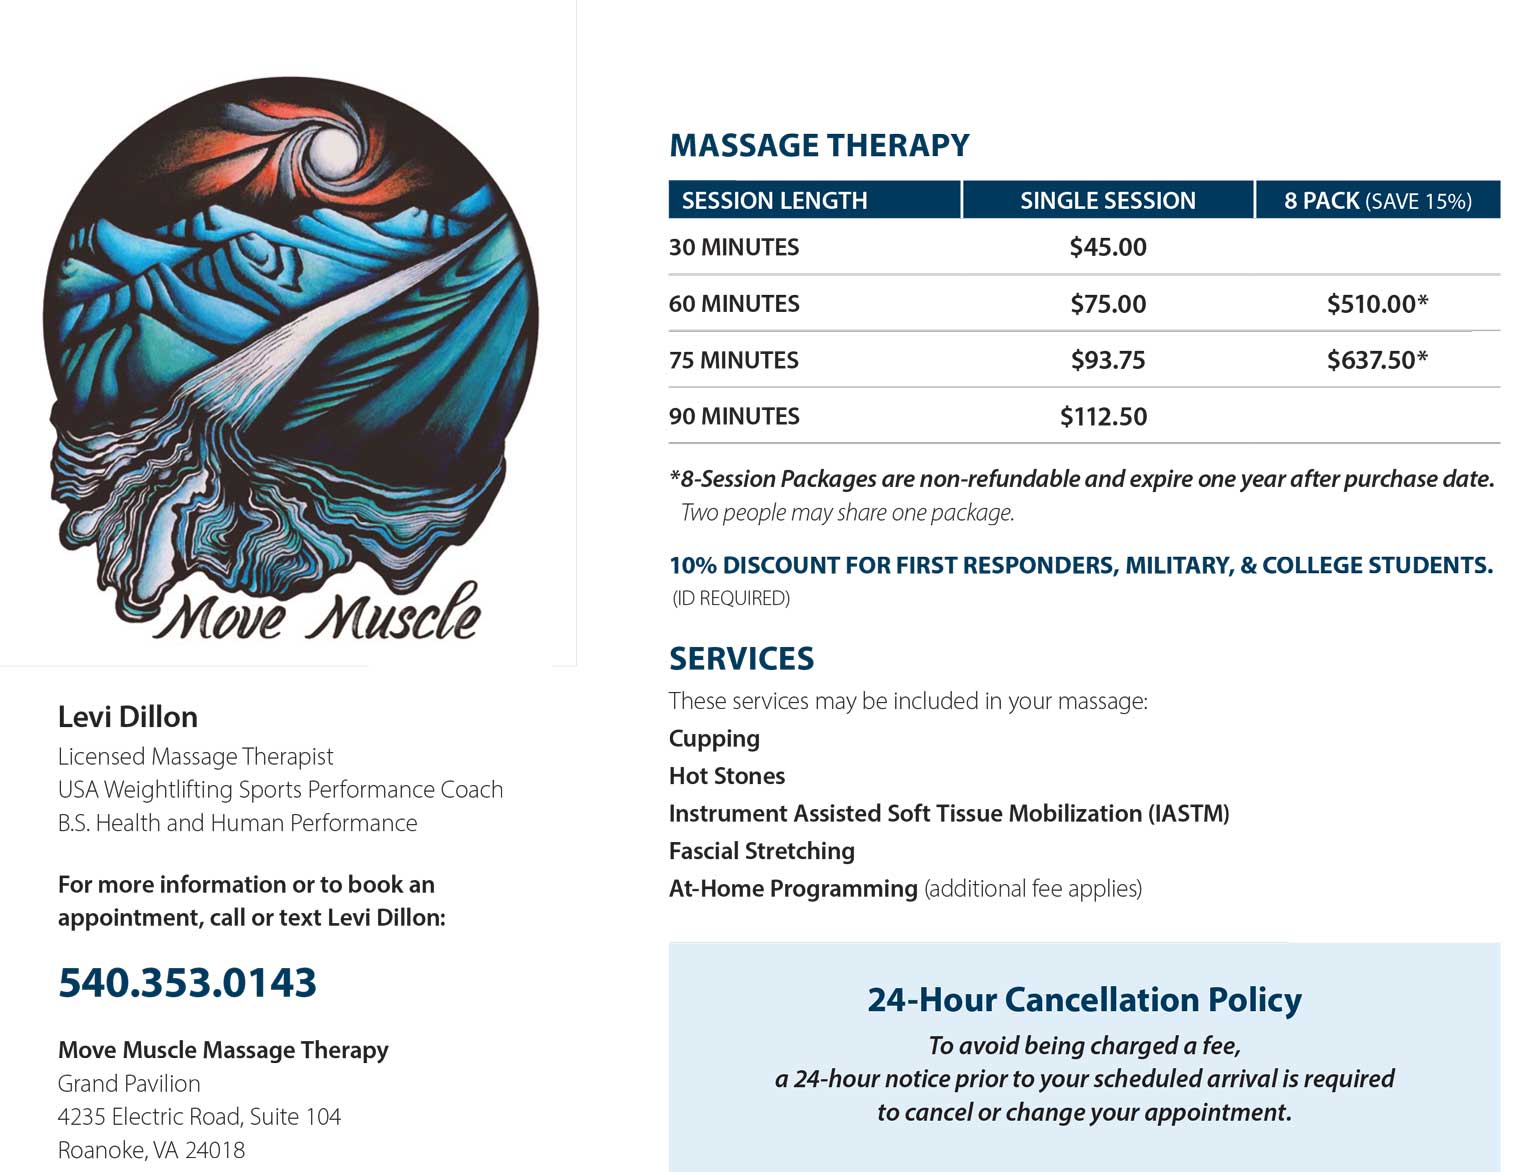 Move Muscle Massage Therapy